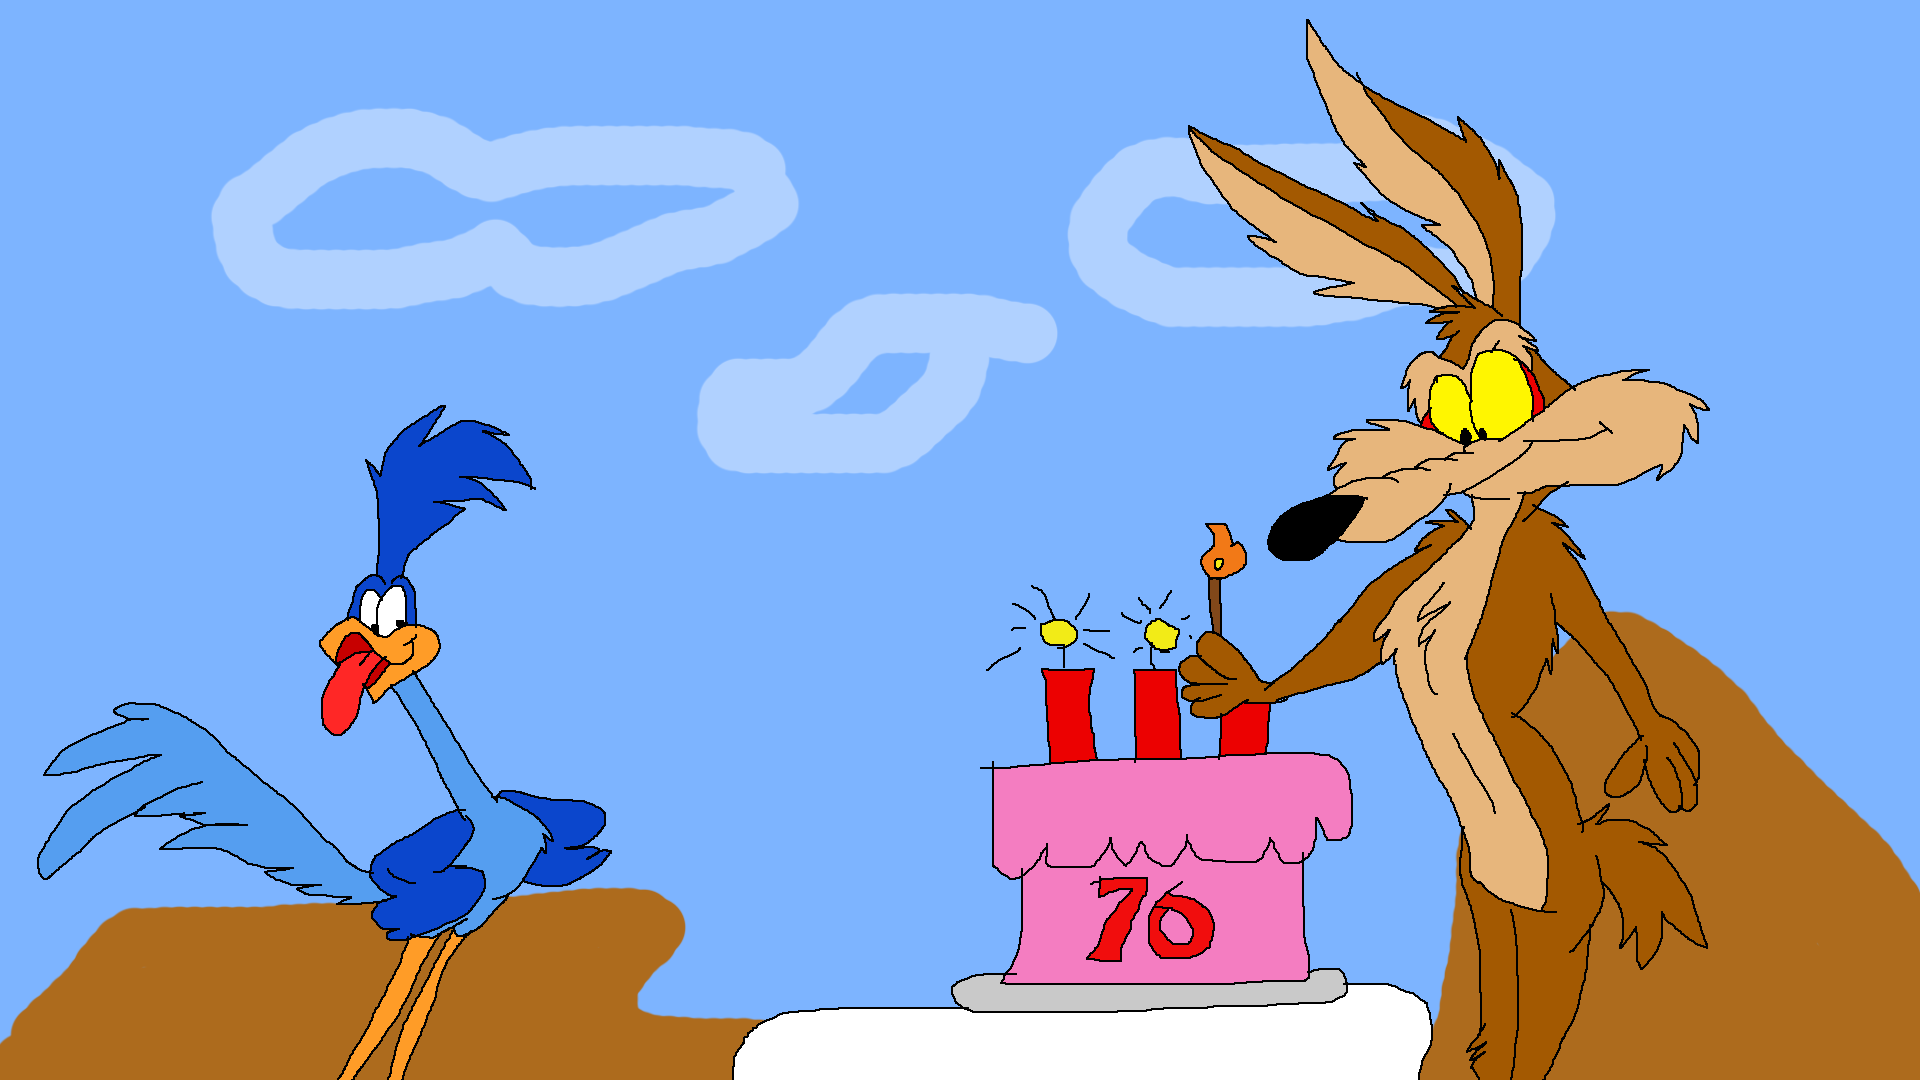 Wile E Coyote and Road Runner 70 years by TomArmstrong20 on DeviantArt